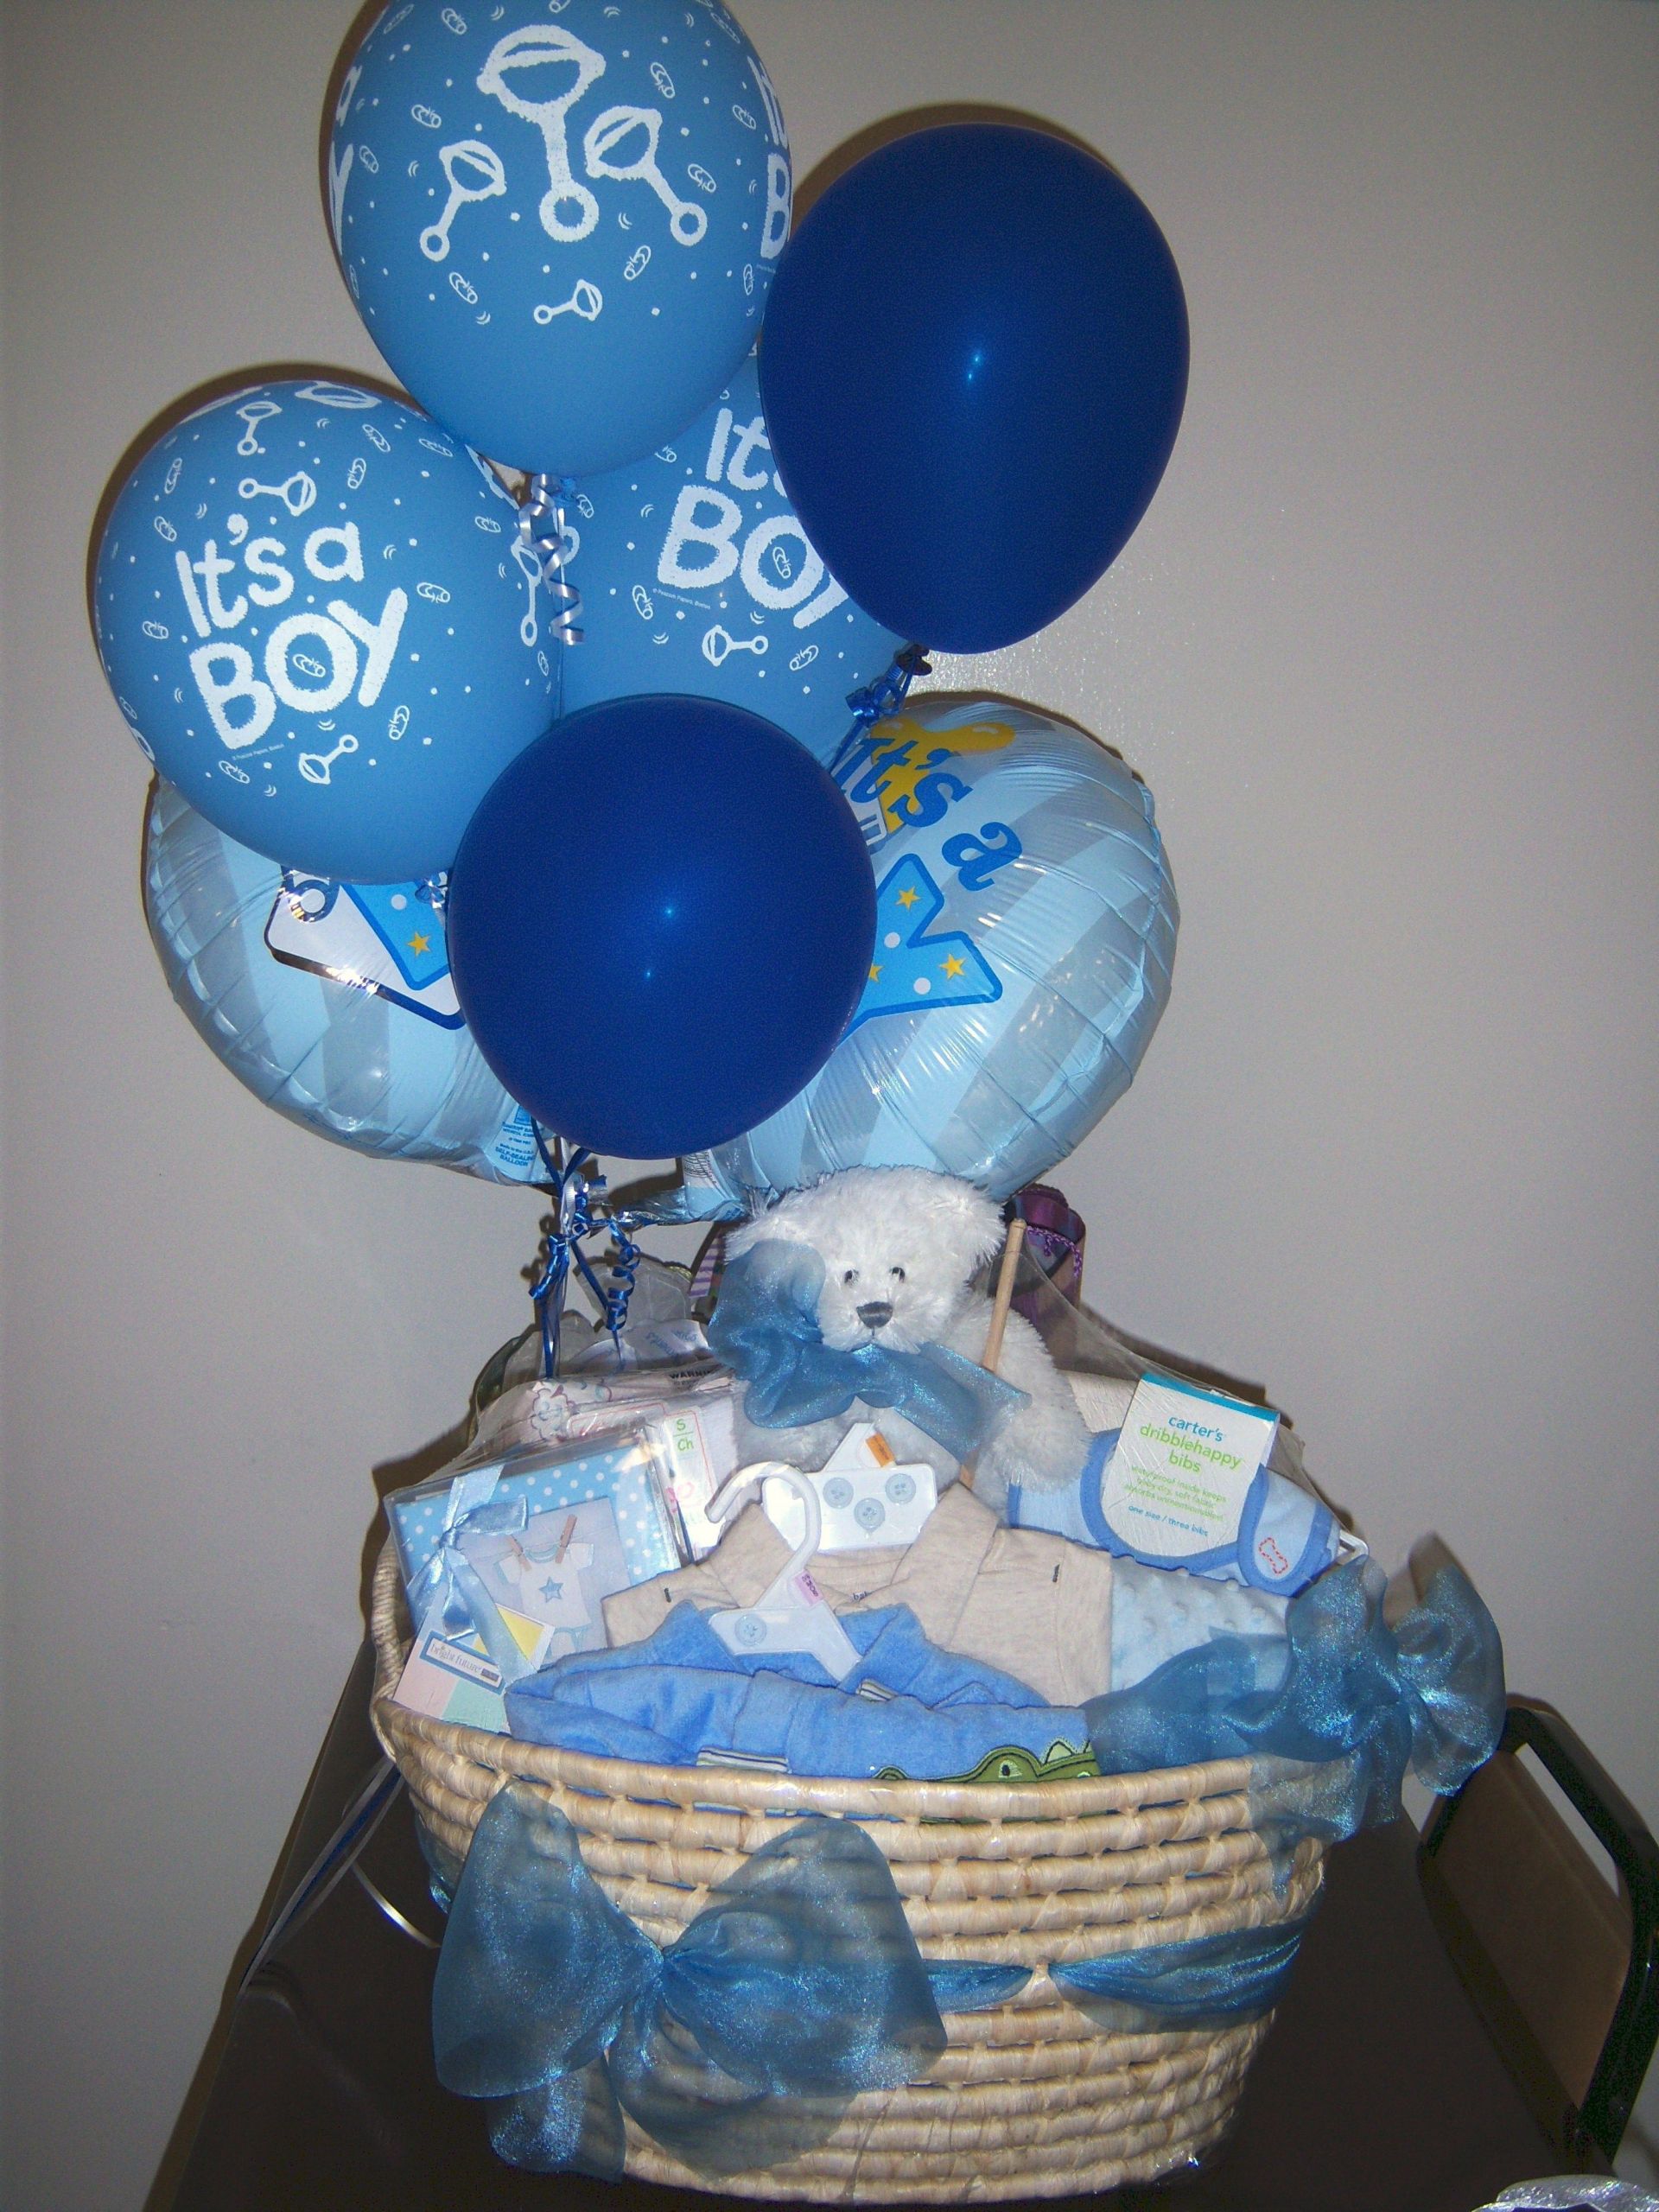 Baby Boy Gifts Pinterest
 Baby Boy Gift Basket Gift Wrapping Pinterest